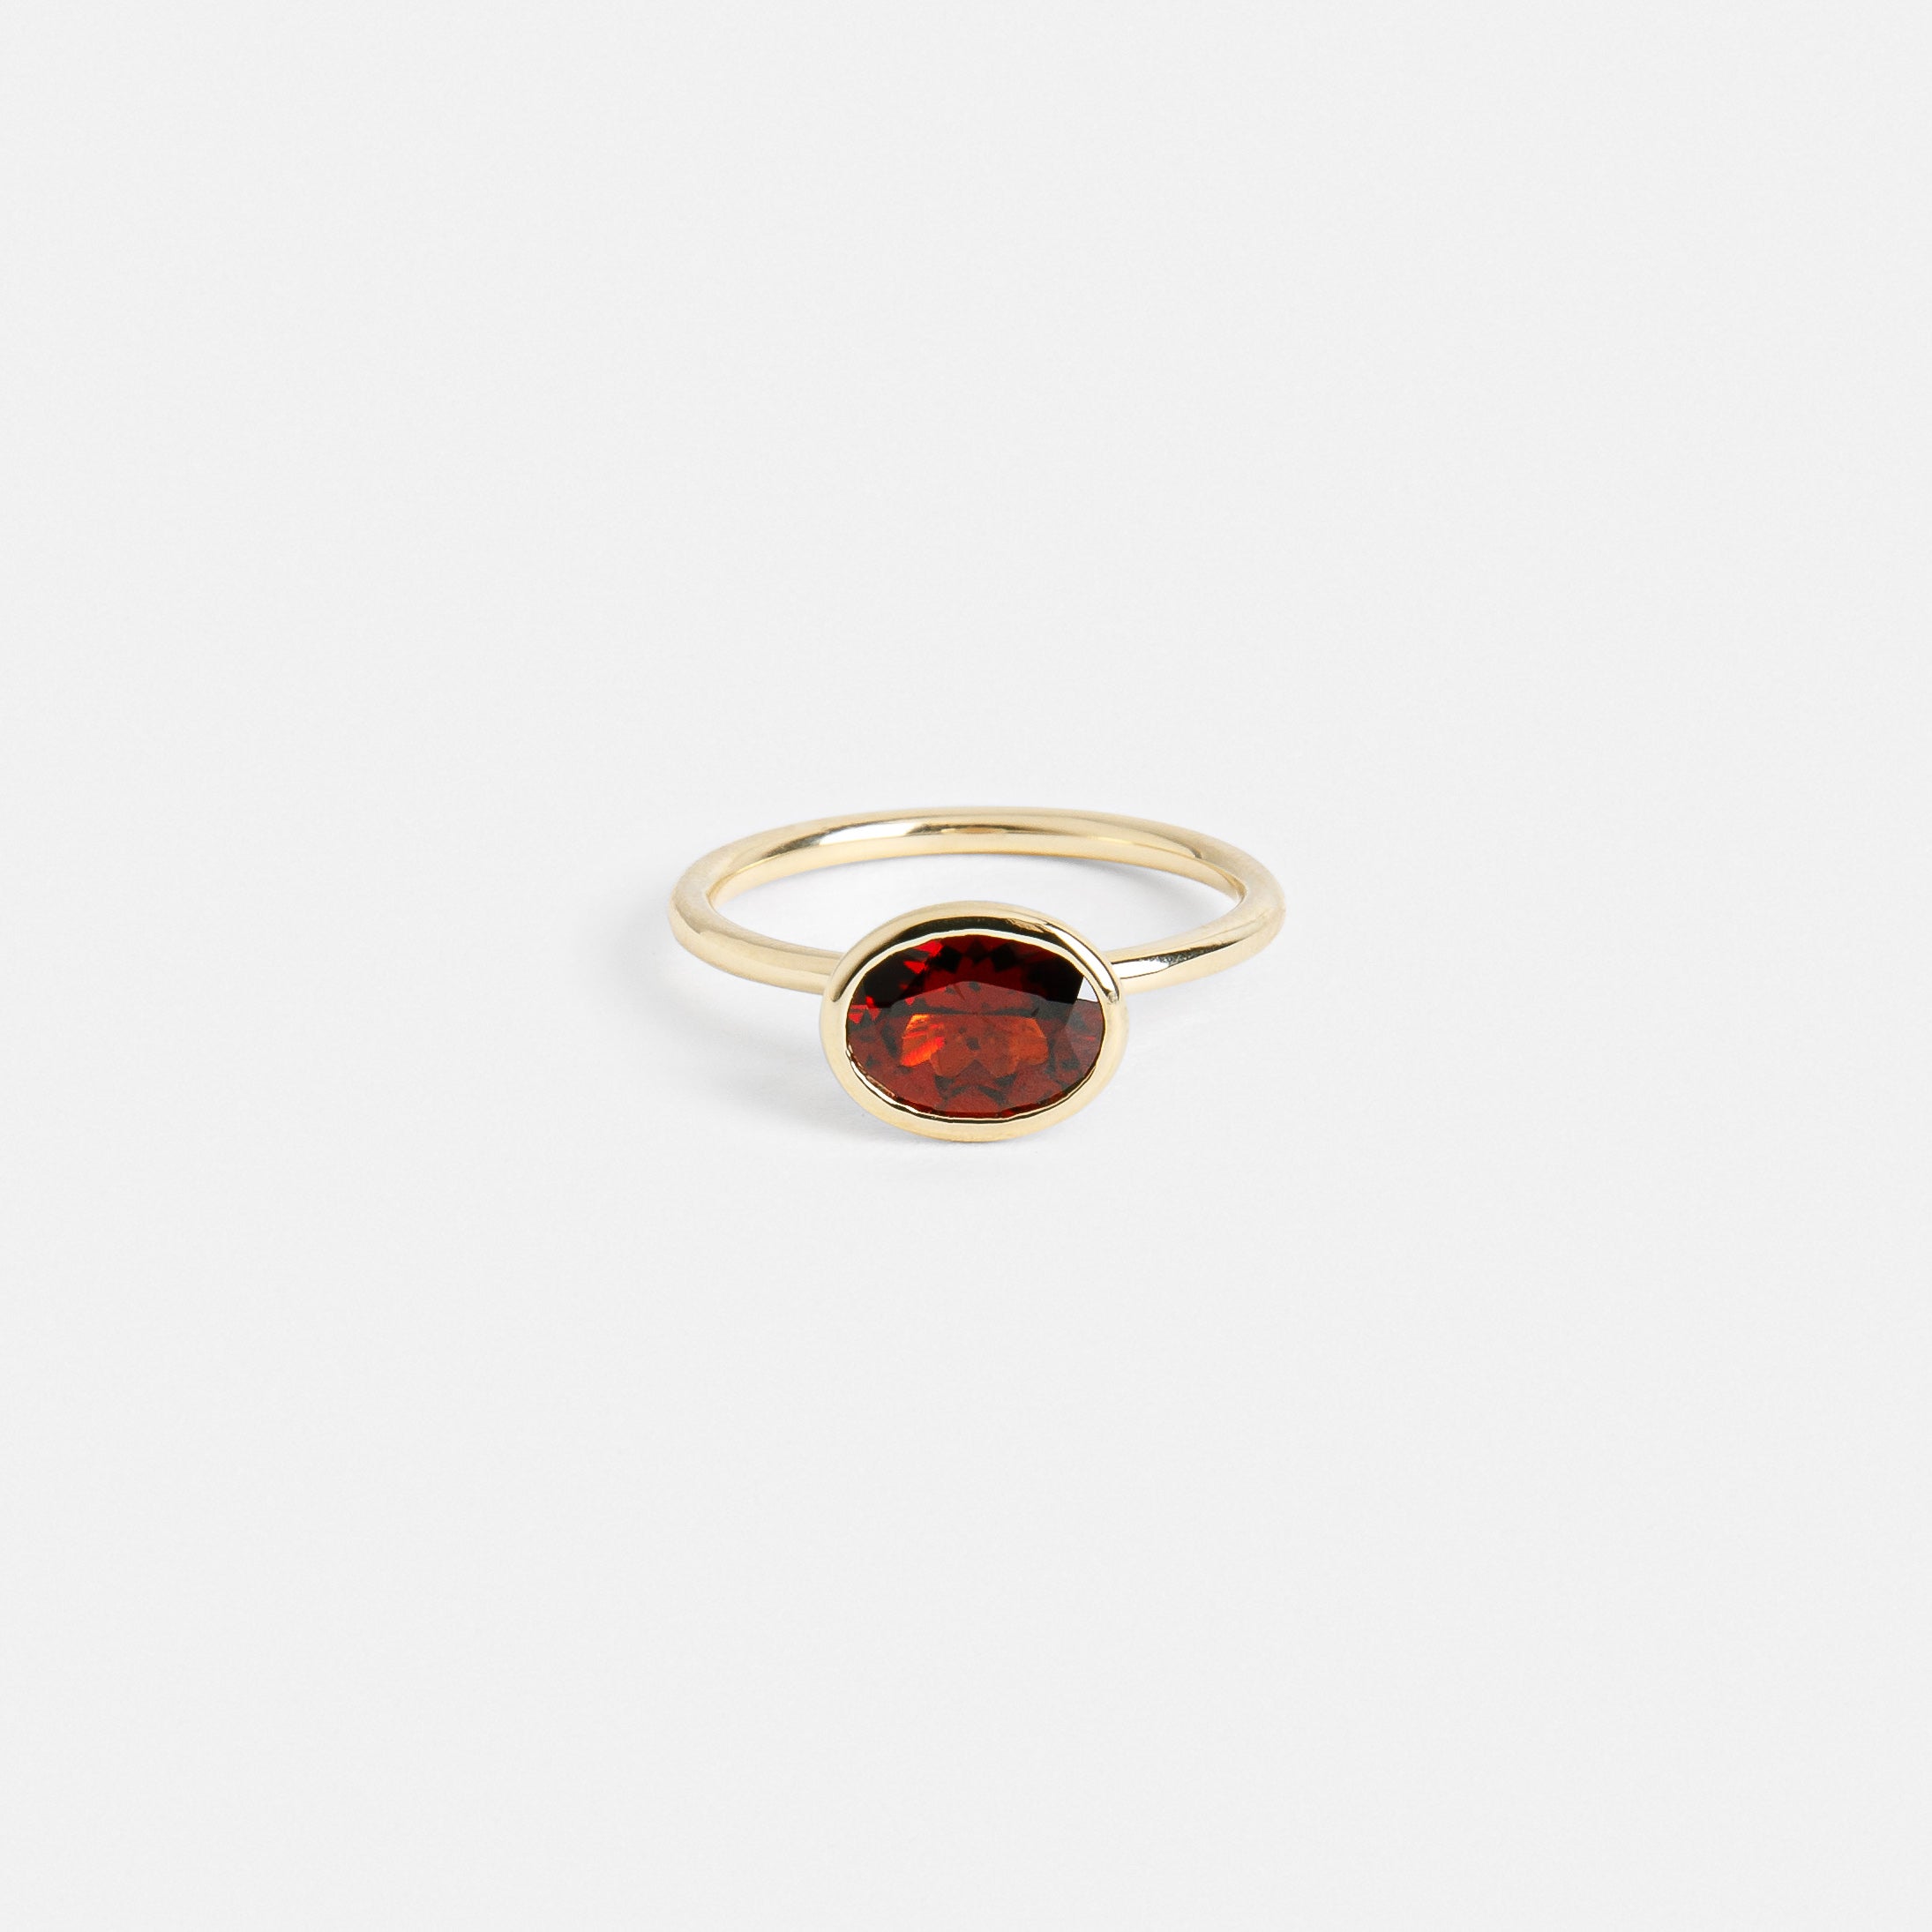 Lida Handmade Ring in 14k Gold set with an oval cut garnet By SHW Fine Jewelry NYC